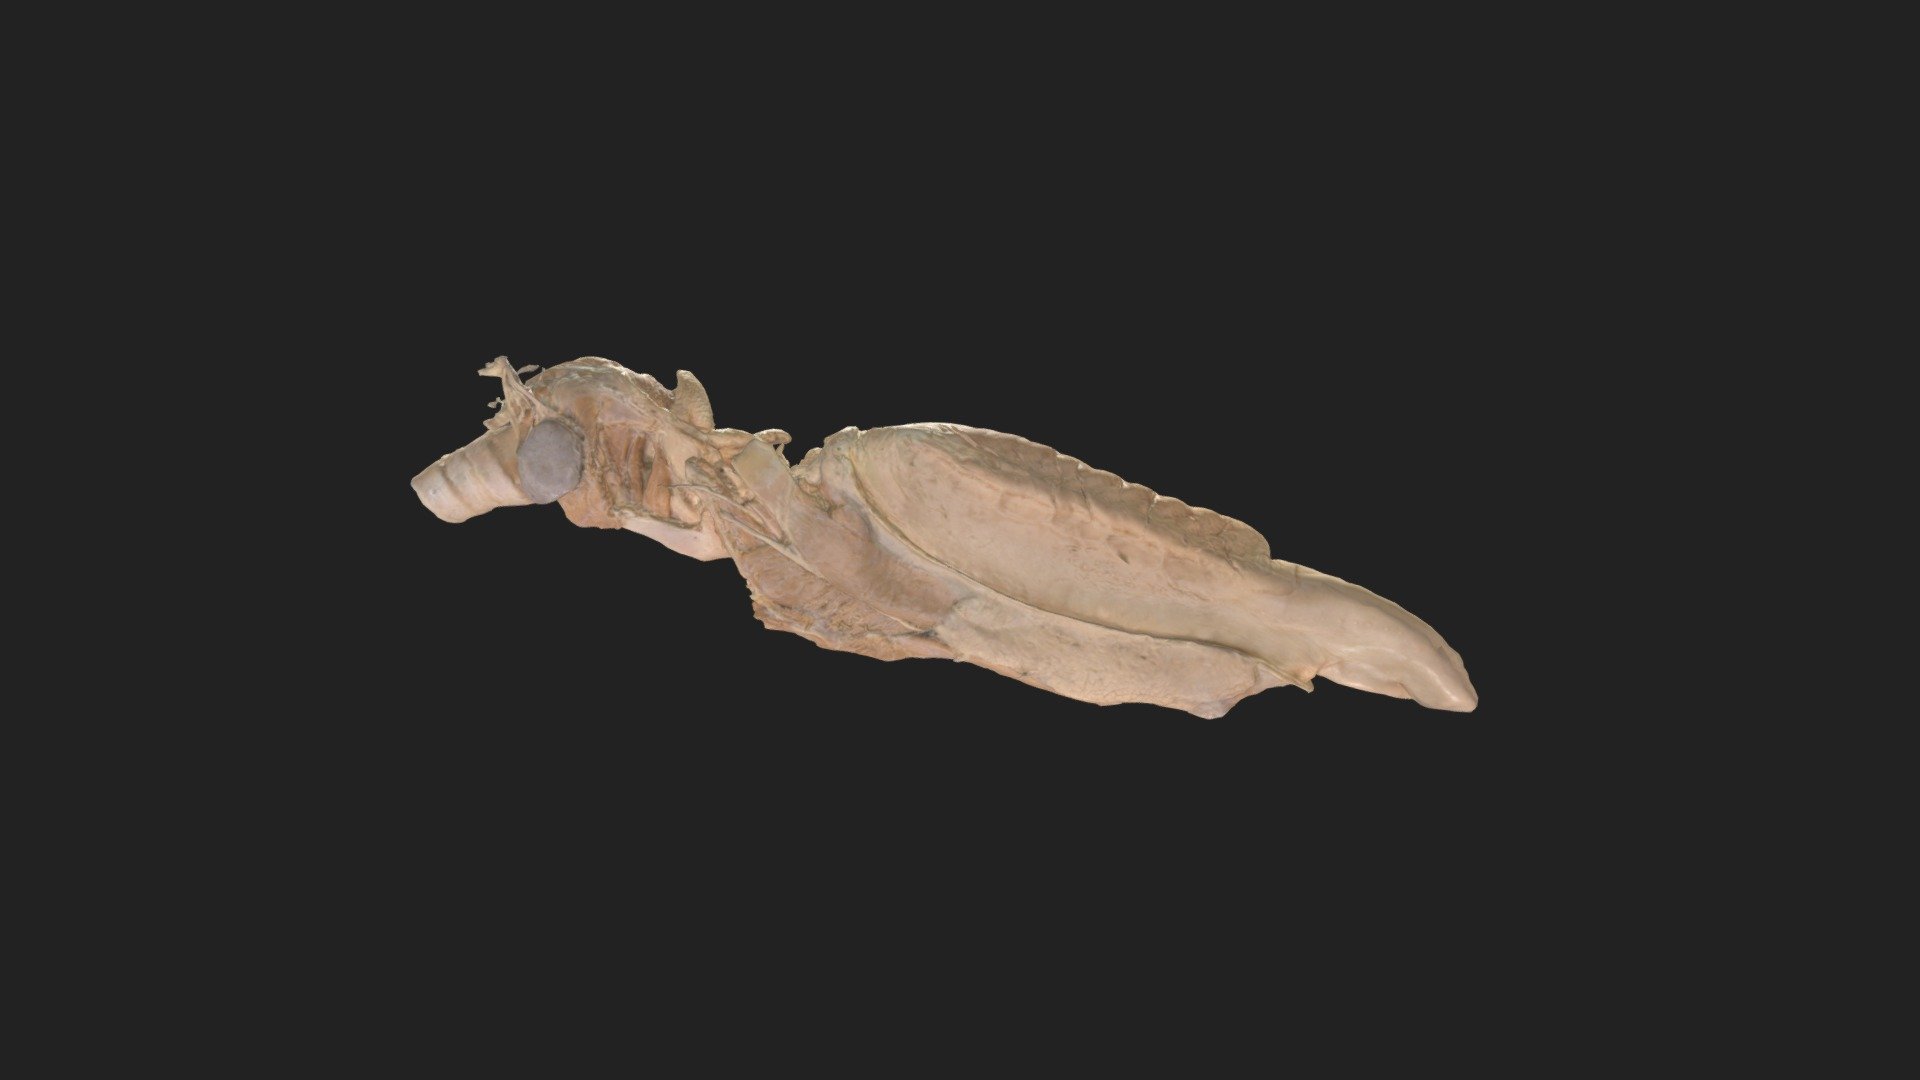 cross-section of a horses tongue 

size of specimen: 523.3 x 119.9 x 37.7 mm

3D scanning performed with the structured light scanner “Artec Space Spider” - tongue horse - 3D model by vetanatMunich 3d model